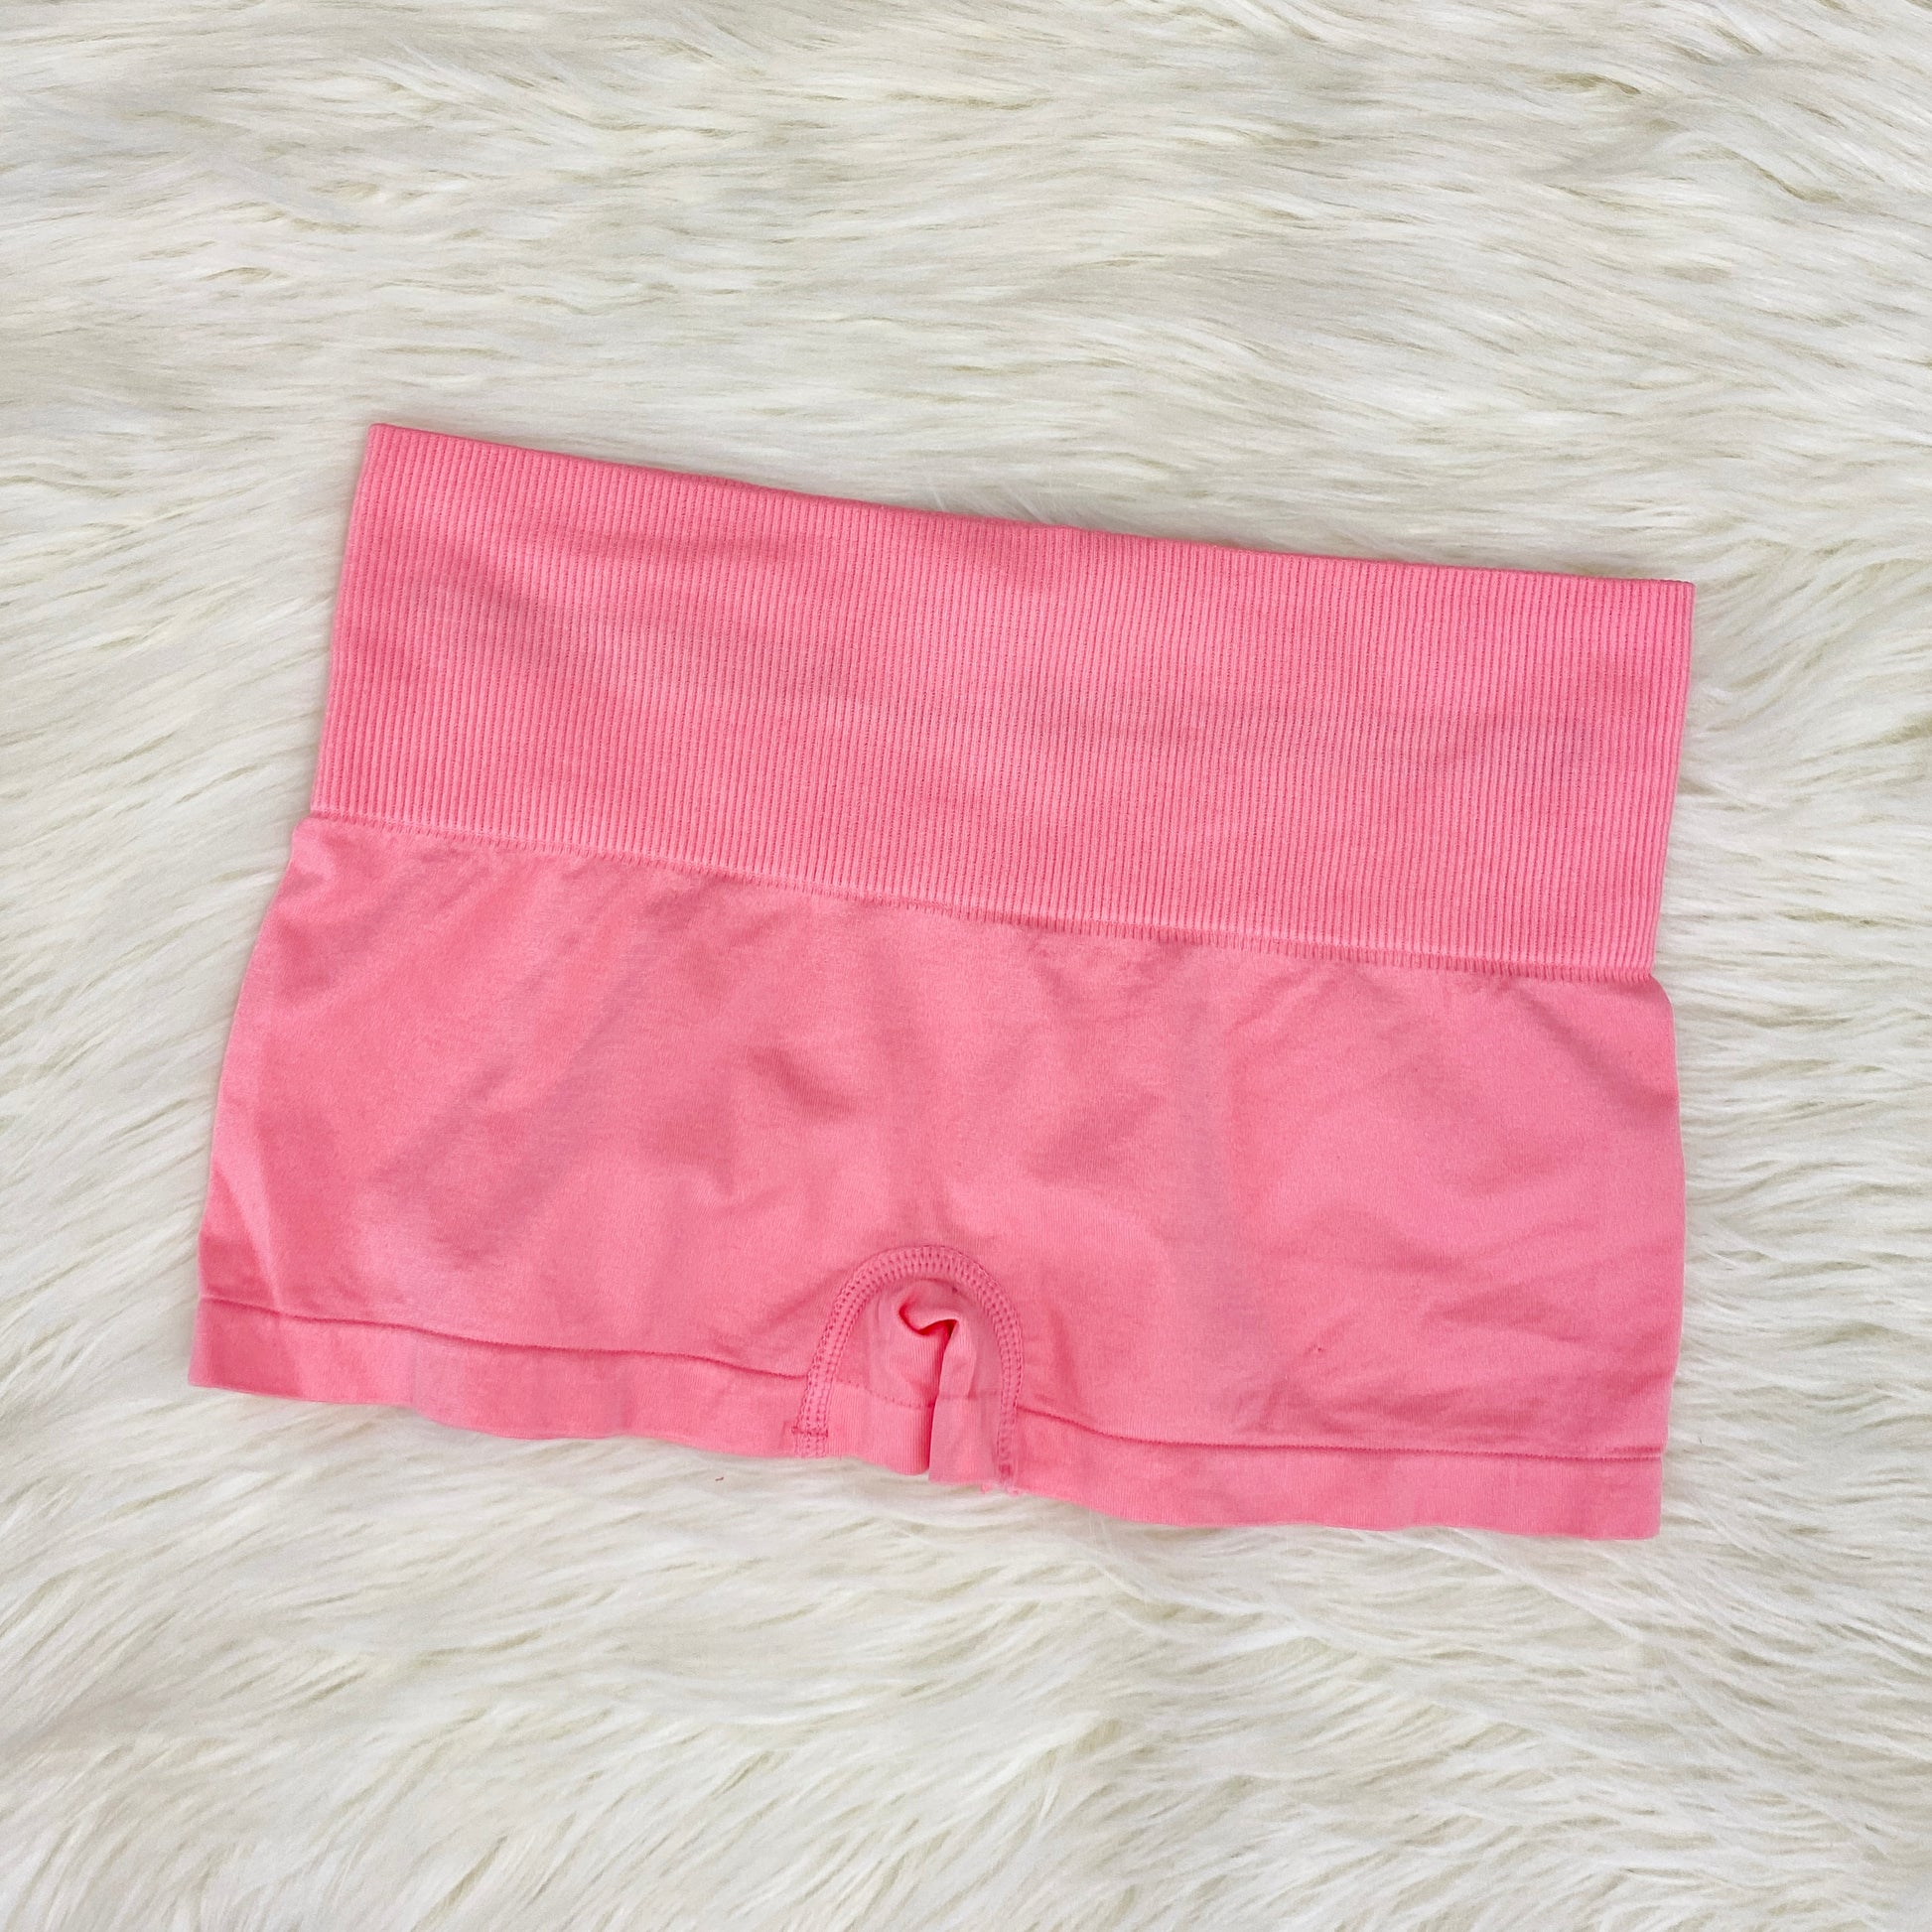 The wider side panels offer additional coverage and support, making them suitable for various activities and lifestyles. Whether you're going to work, hitting the gym, or simply lounging at home, these panties will keep you comfortable and confident throughout the day.